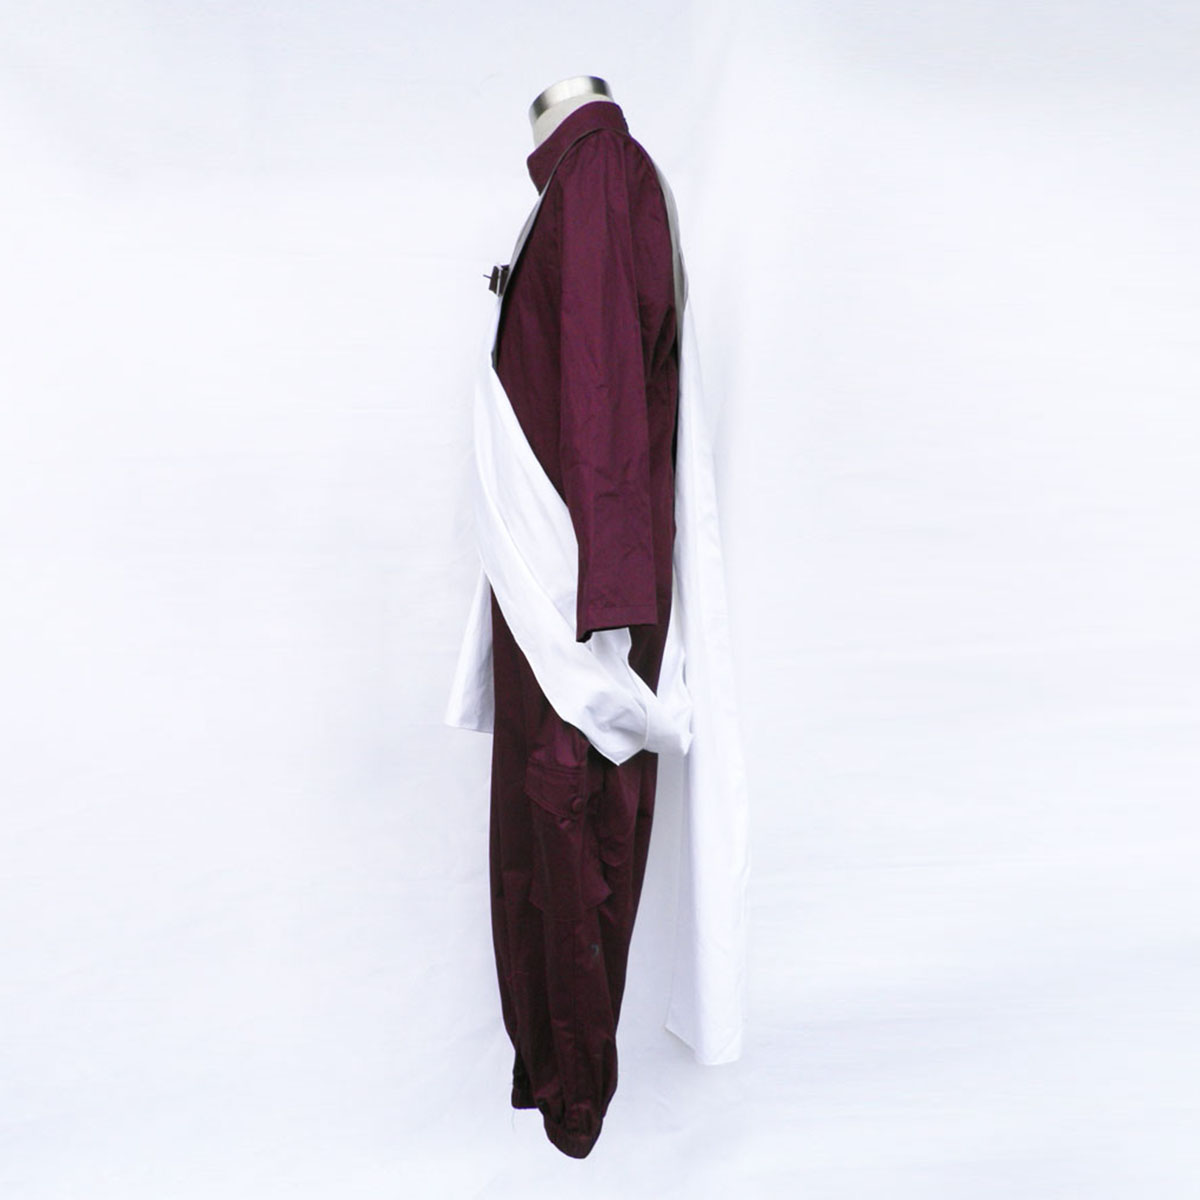 Naruto Gaara 3 Anime Cosplay Costumes Outfit